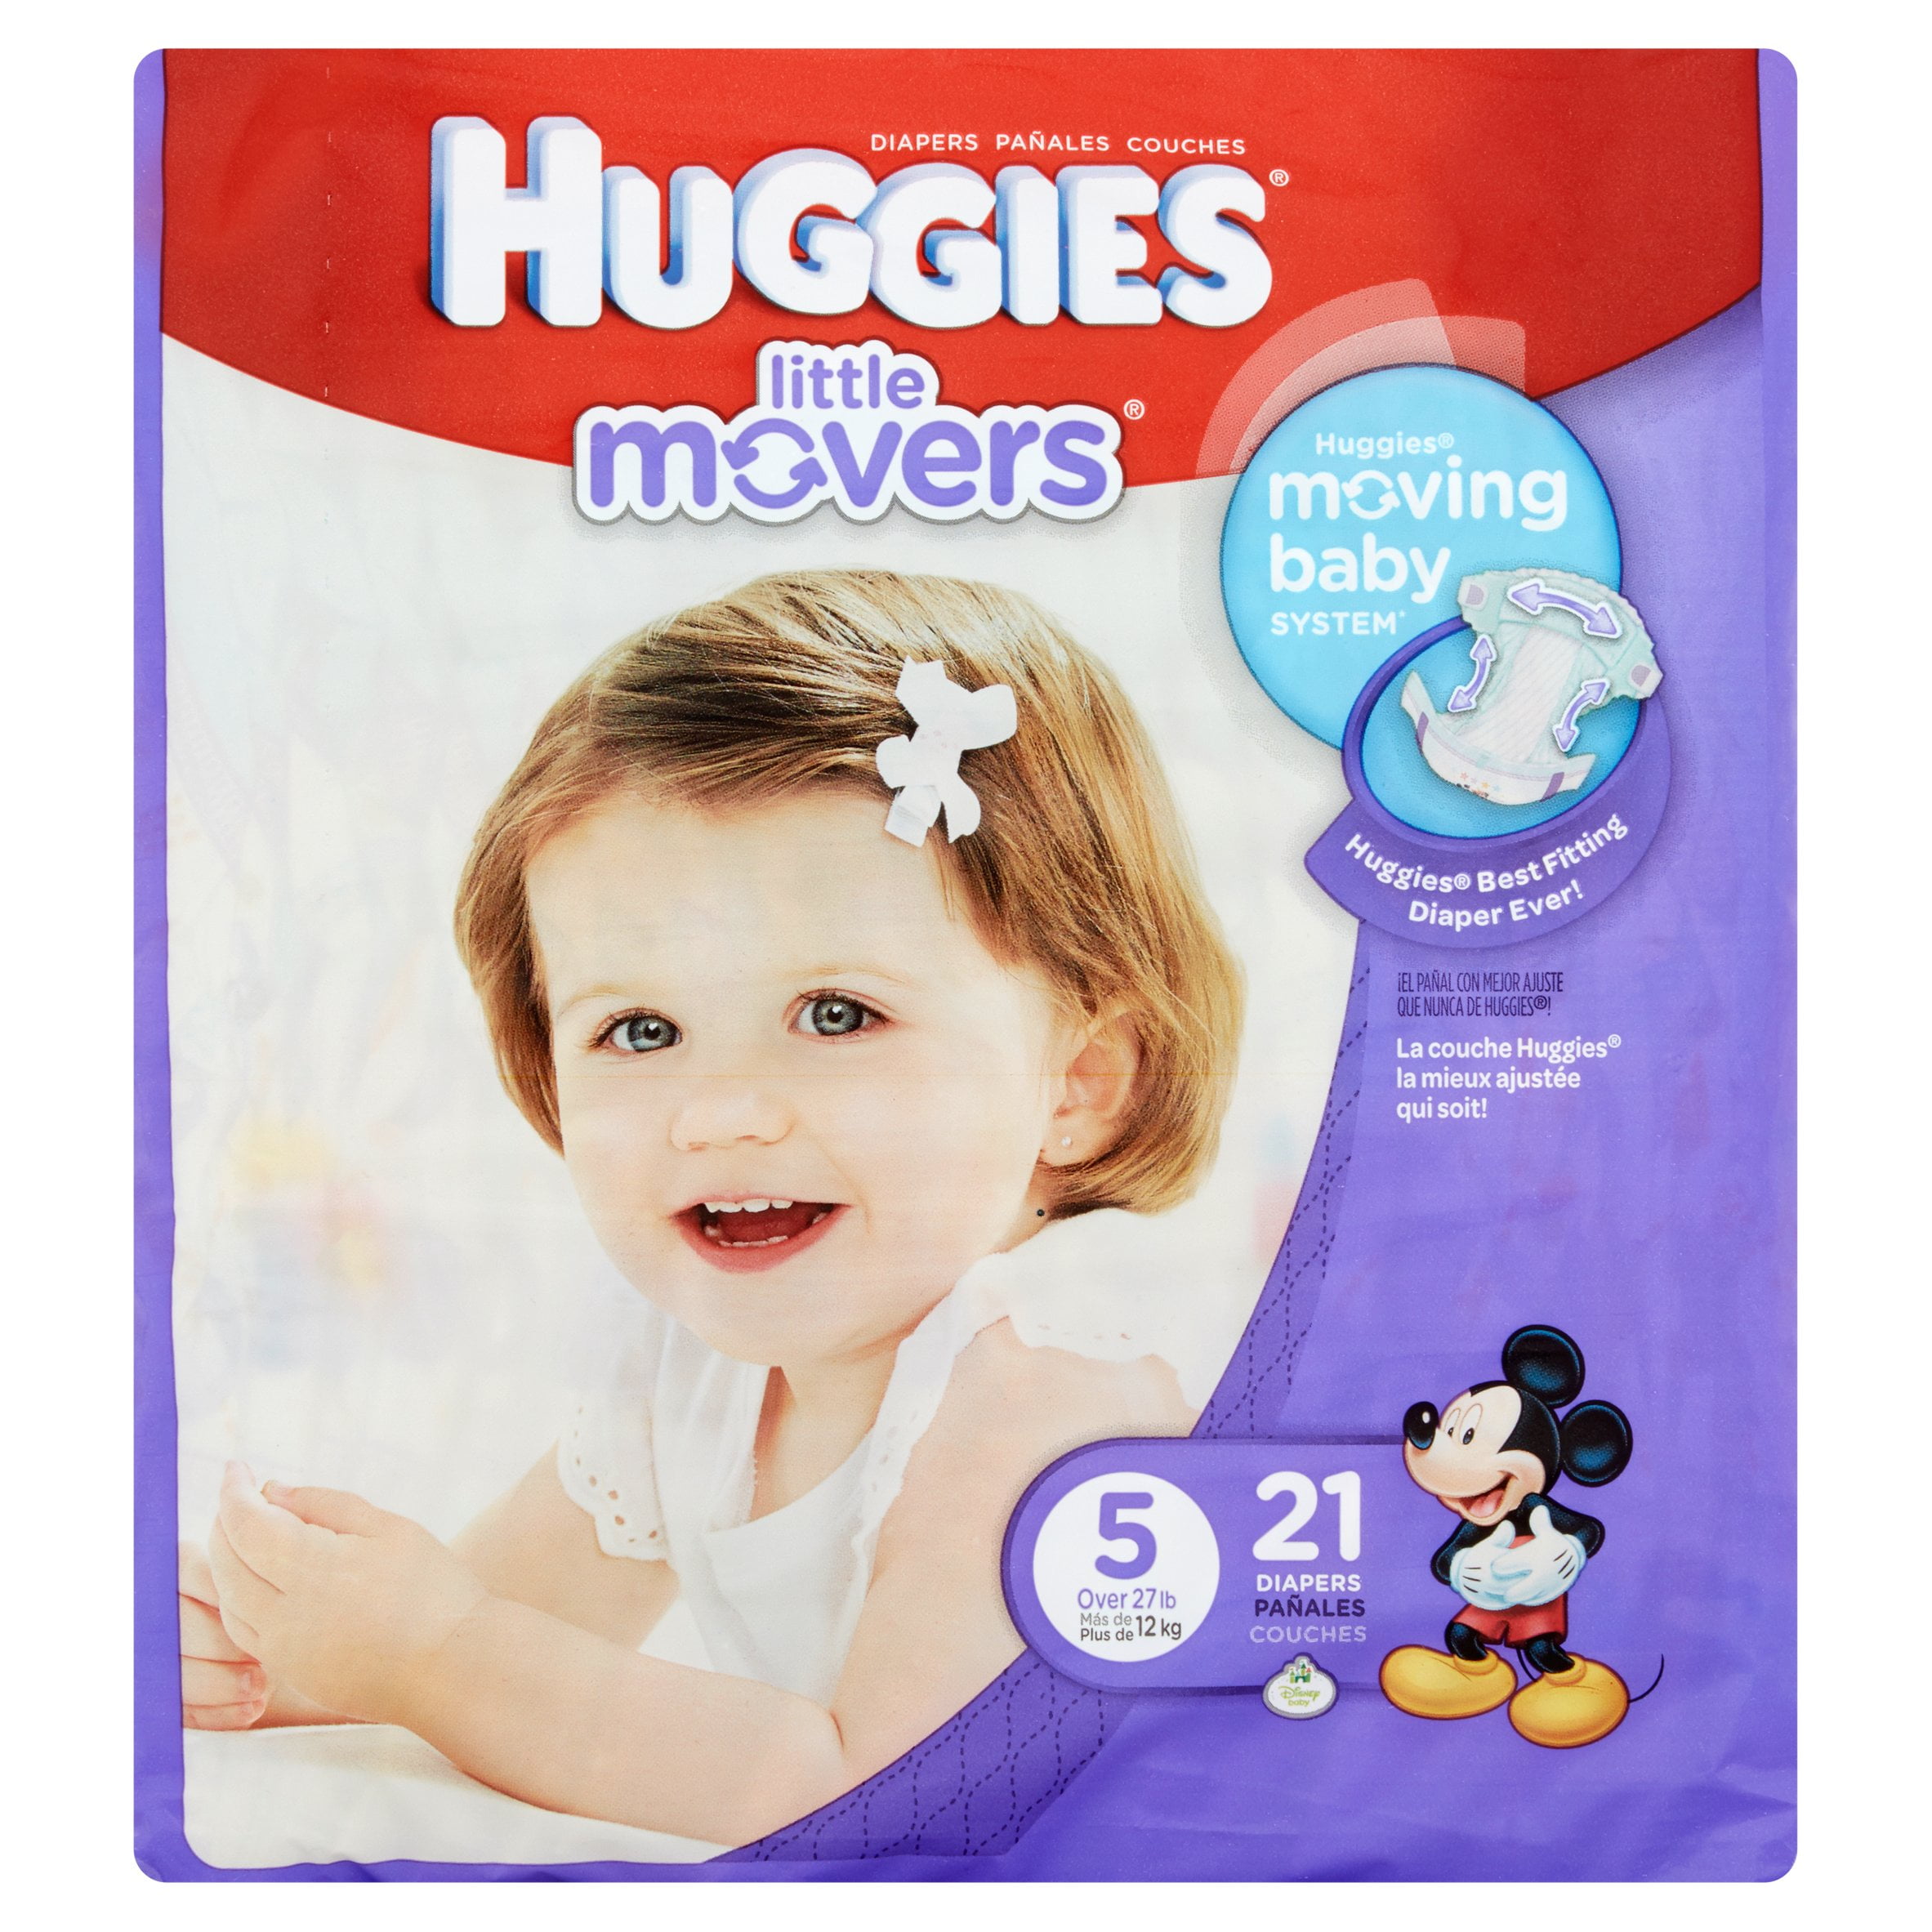 Huggies Little Movers Diapers, Size 5, 21 ct